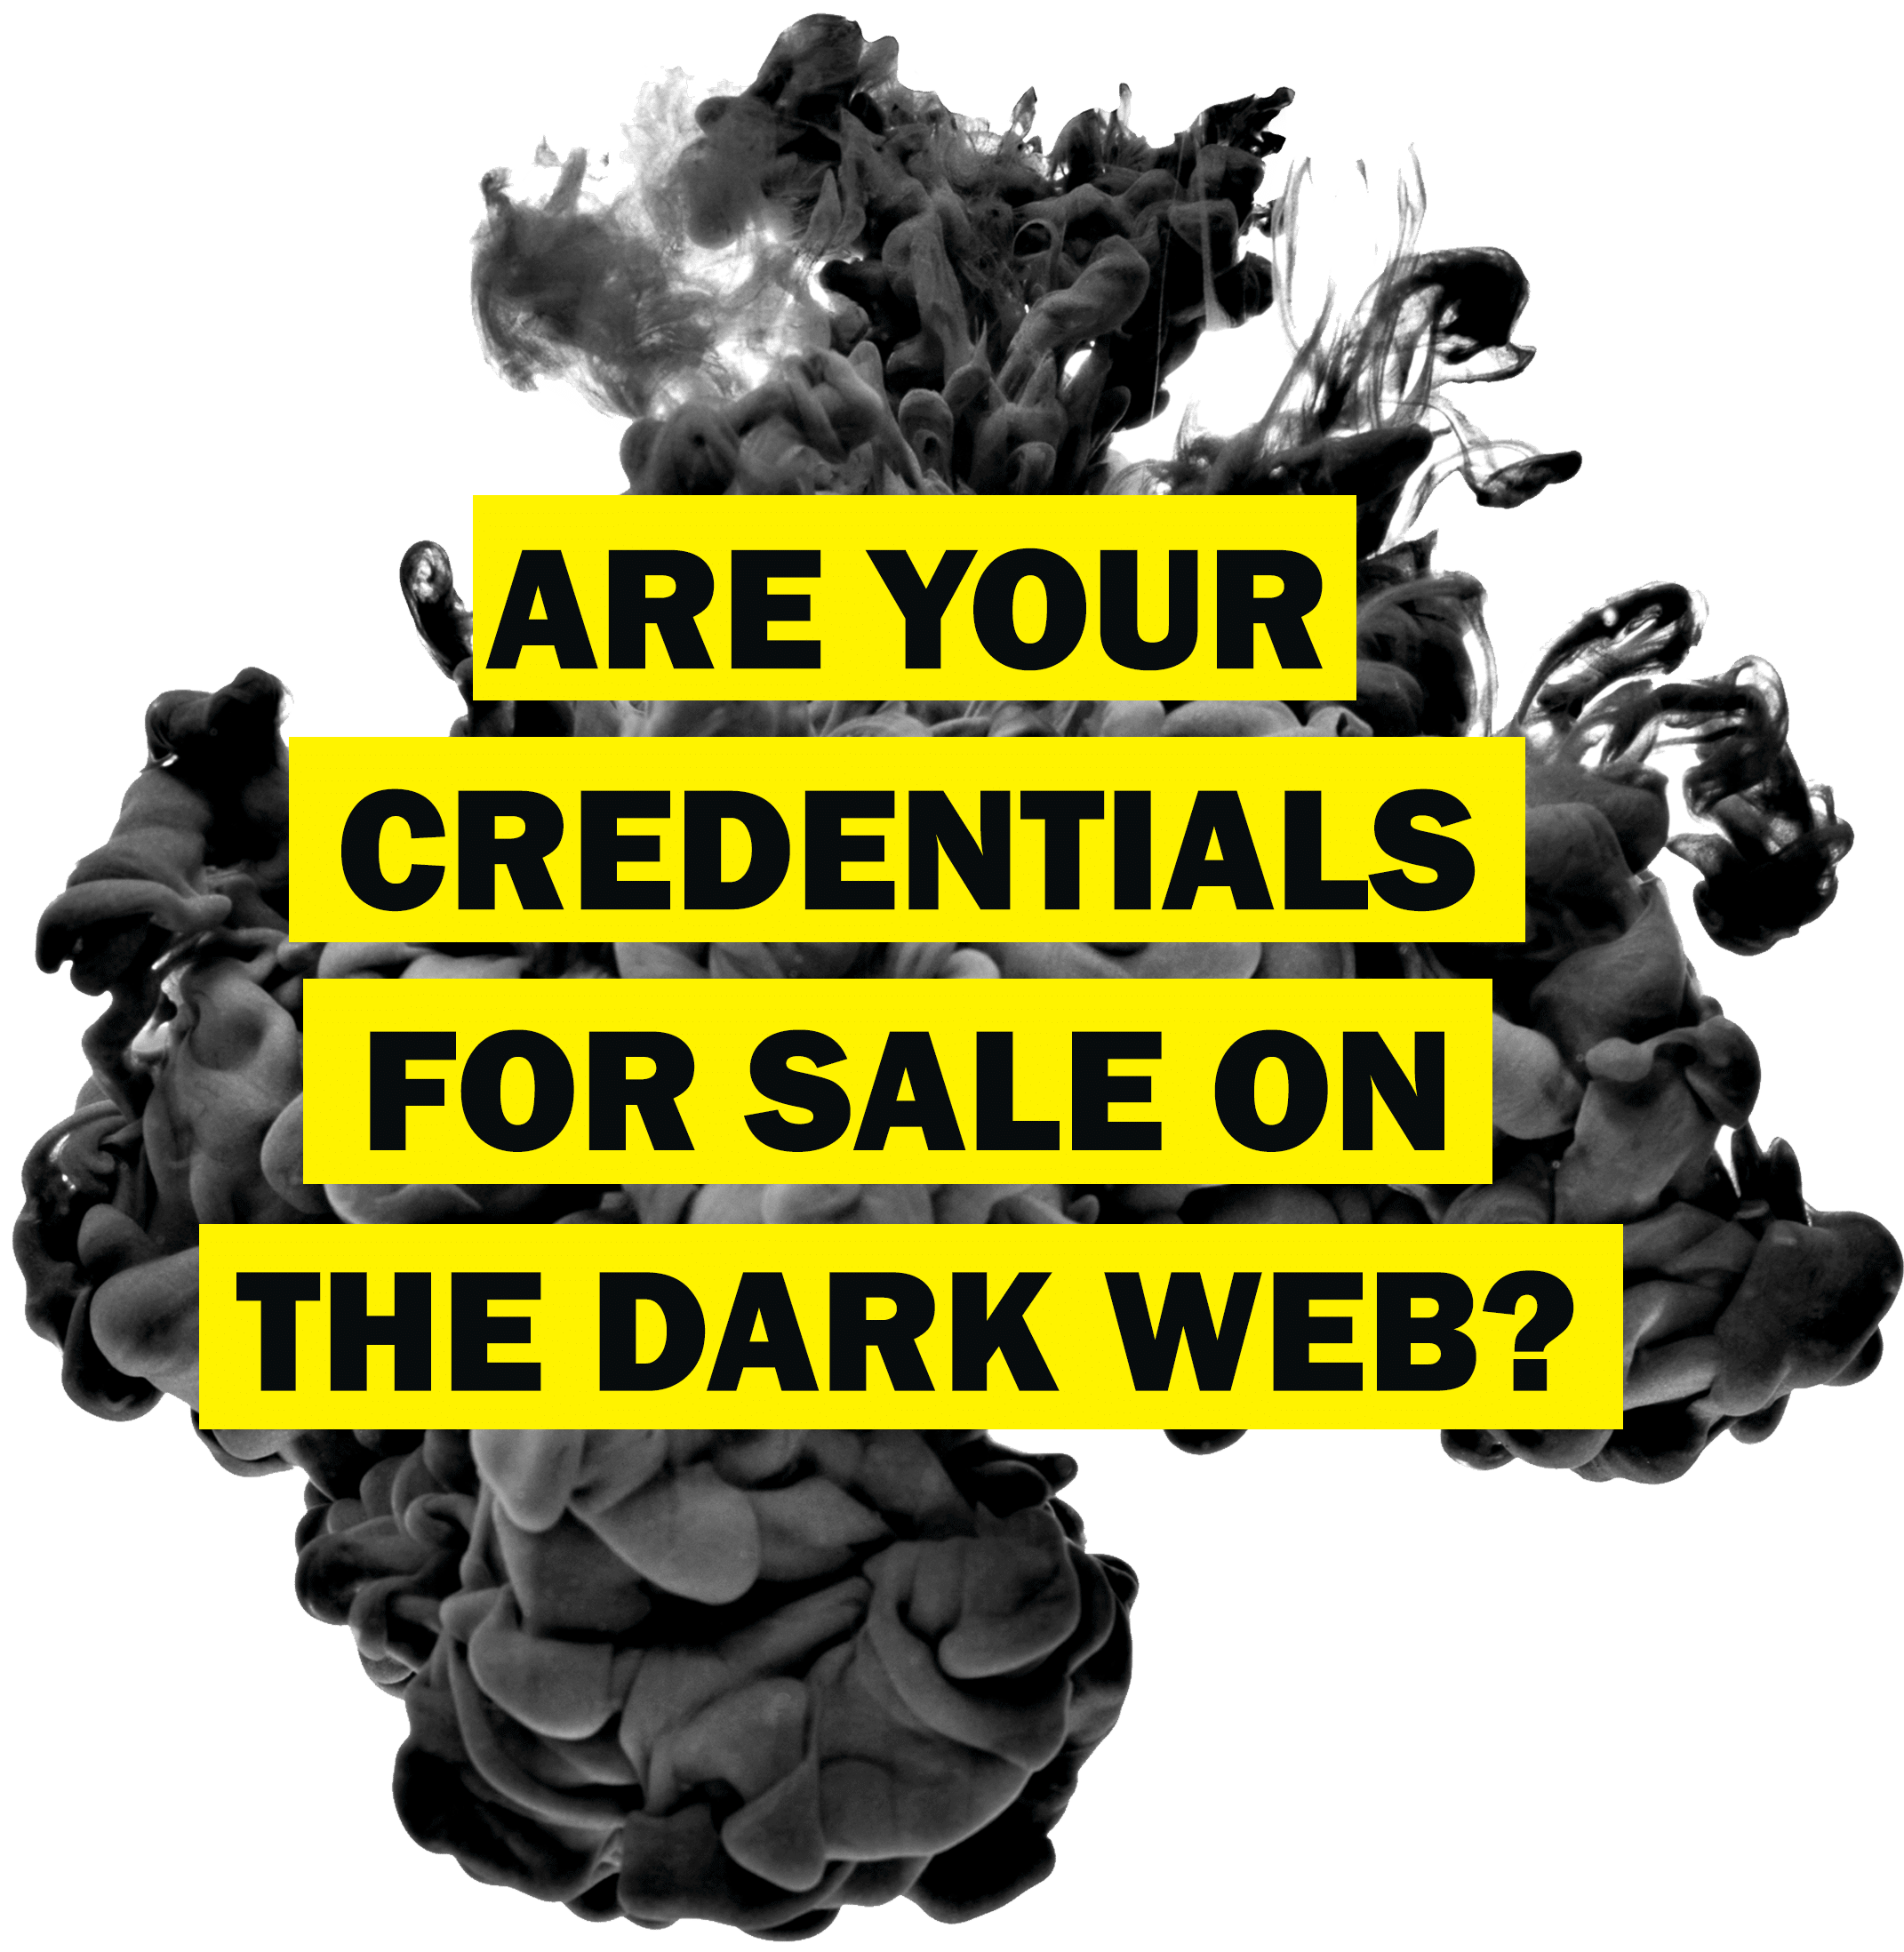 are your credentials for sale on the dark web info graphic